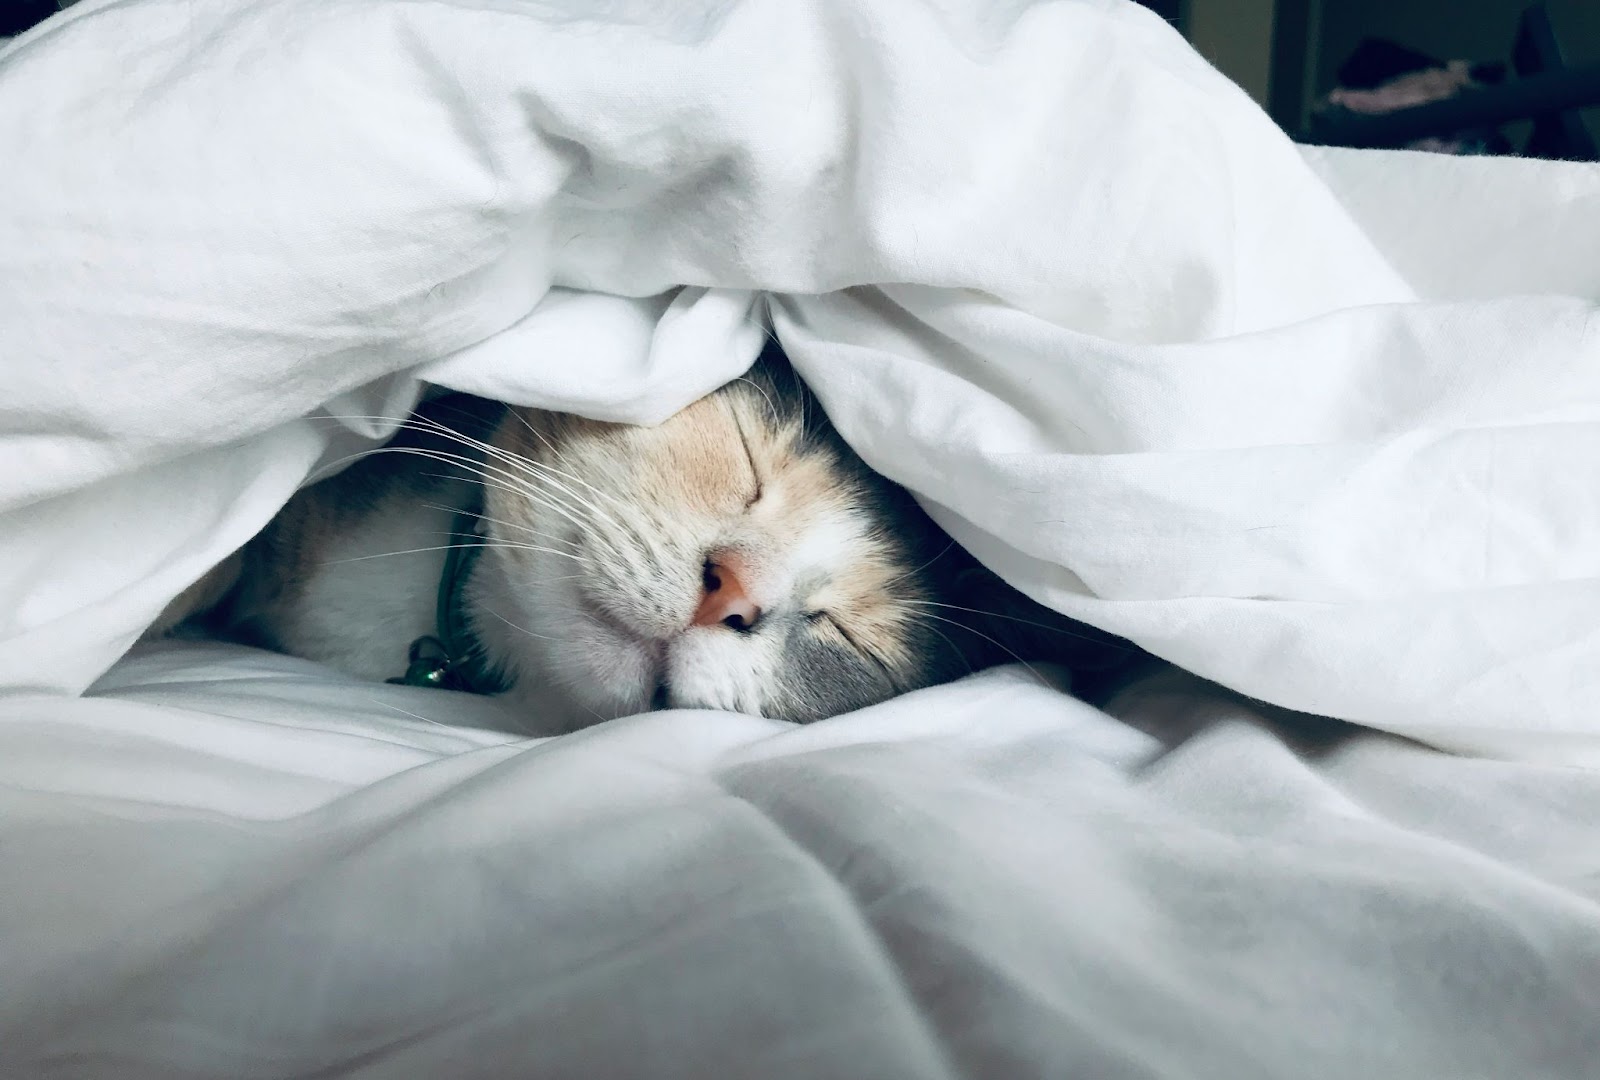 A close-up picture of a cat sleeping under the covers